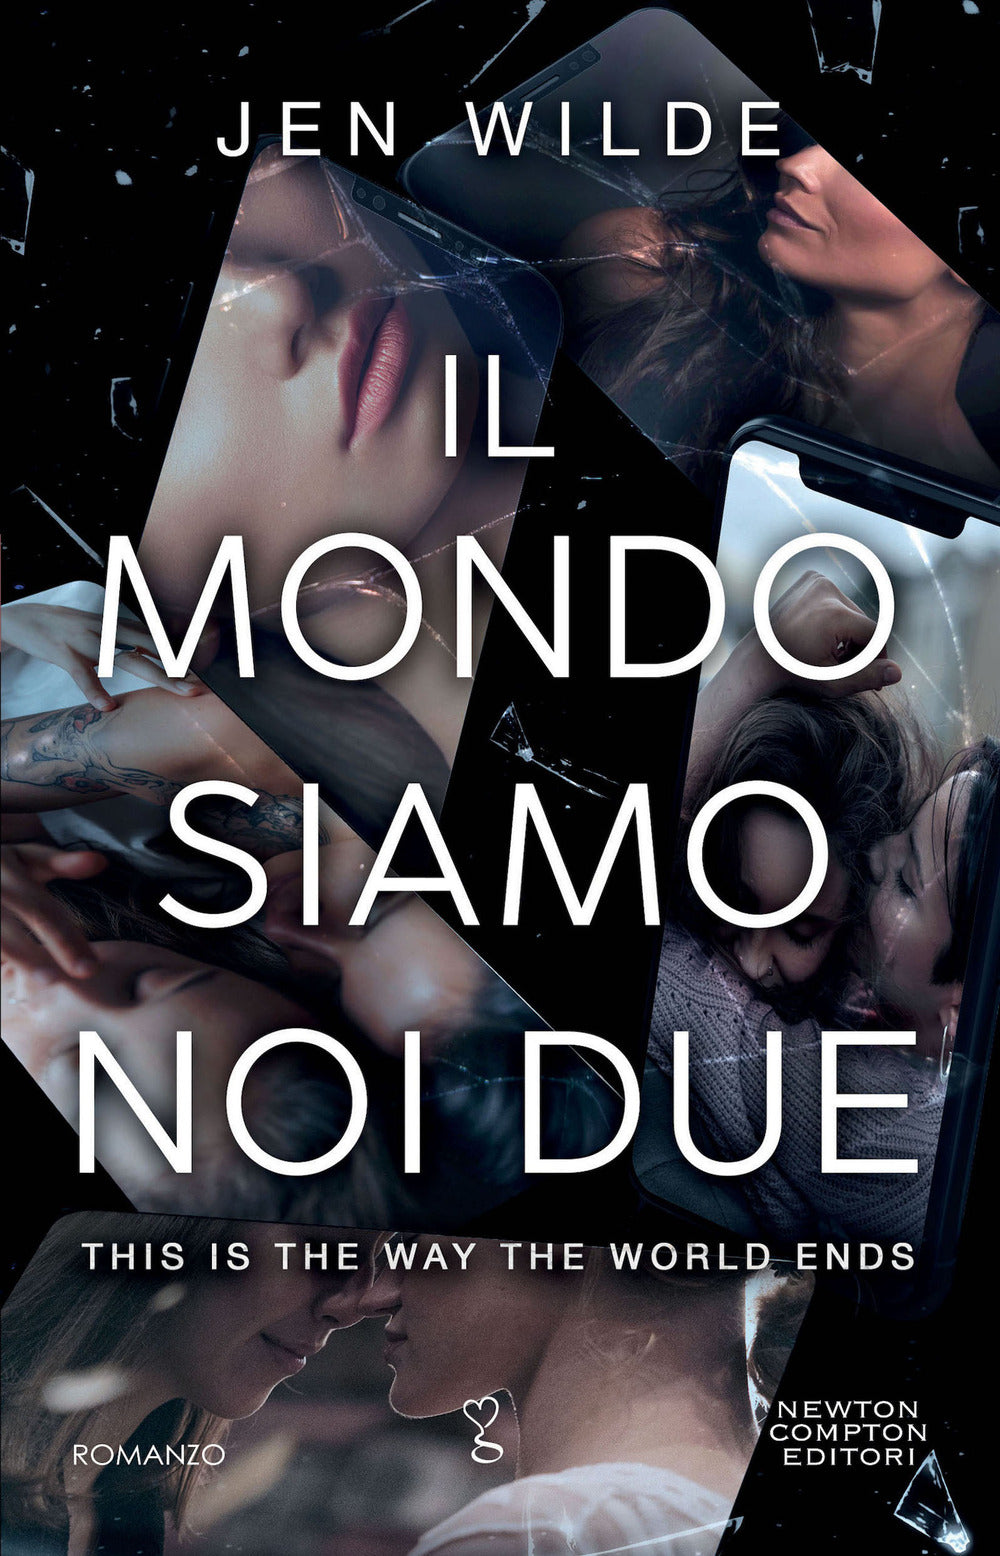 Il mondo siamo noi due. This is the way the world ends